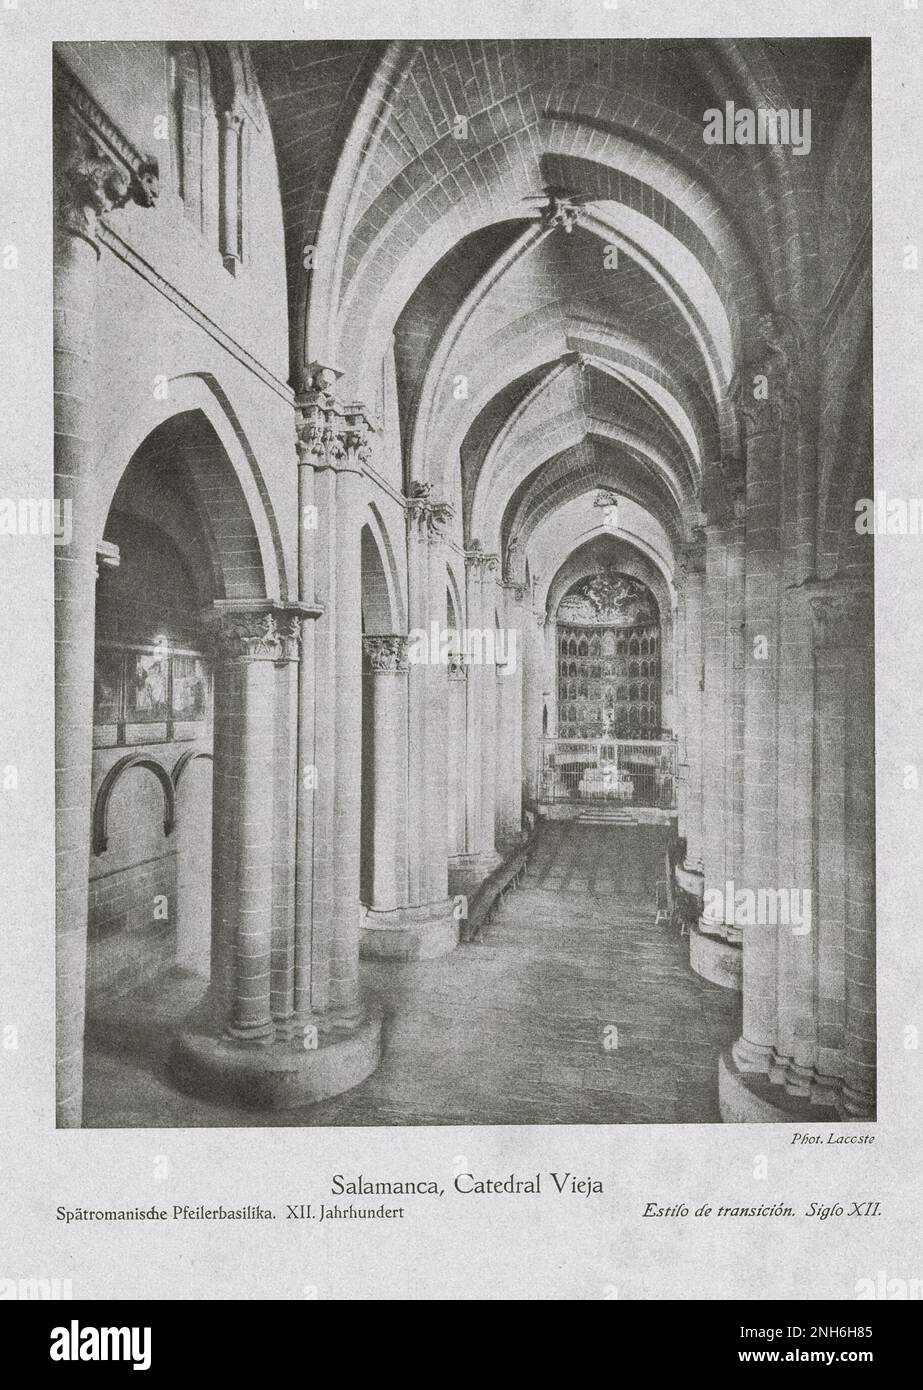 Architecture of Old Spain. Vintage photo of Old Cathedral of Salamanca (Catedral Vieja de Santa María). One of two cathedrals in Salamanca, Spain, the other being the New Cathedral of Salamanca. The two cathedrals are joined together. Stock Photo